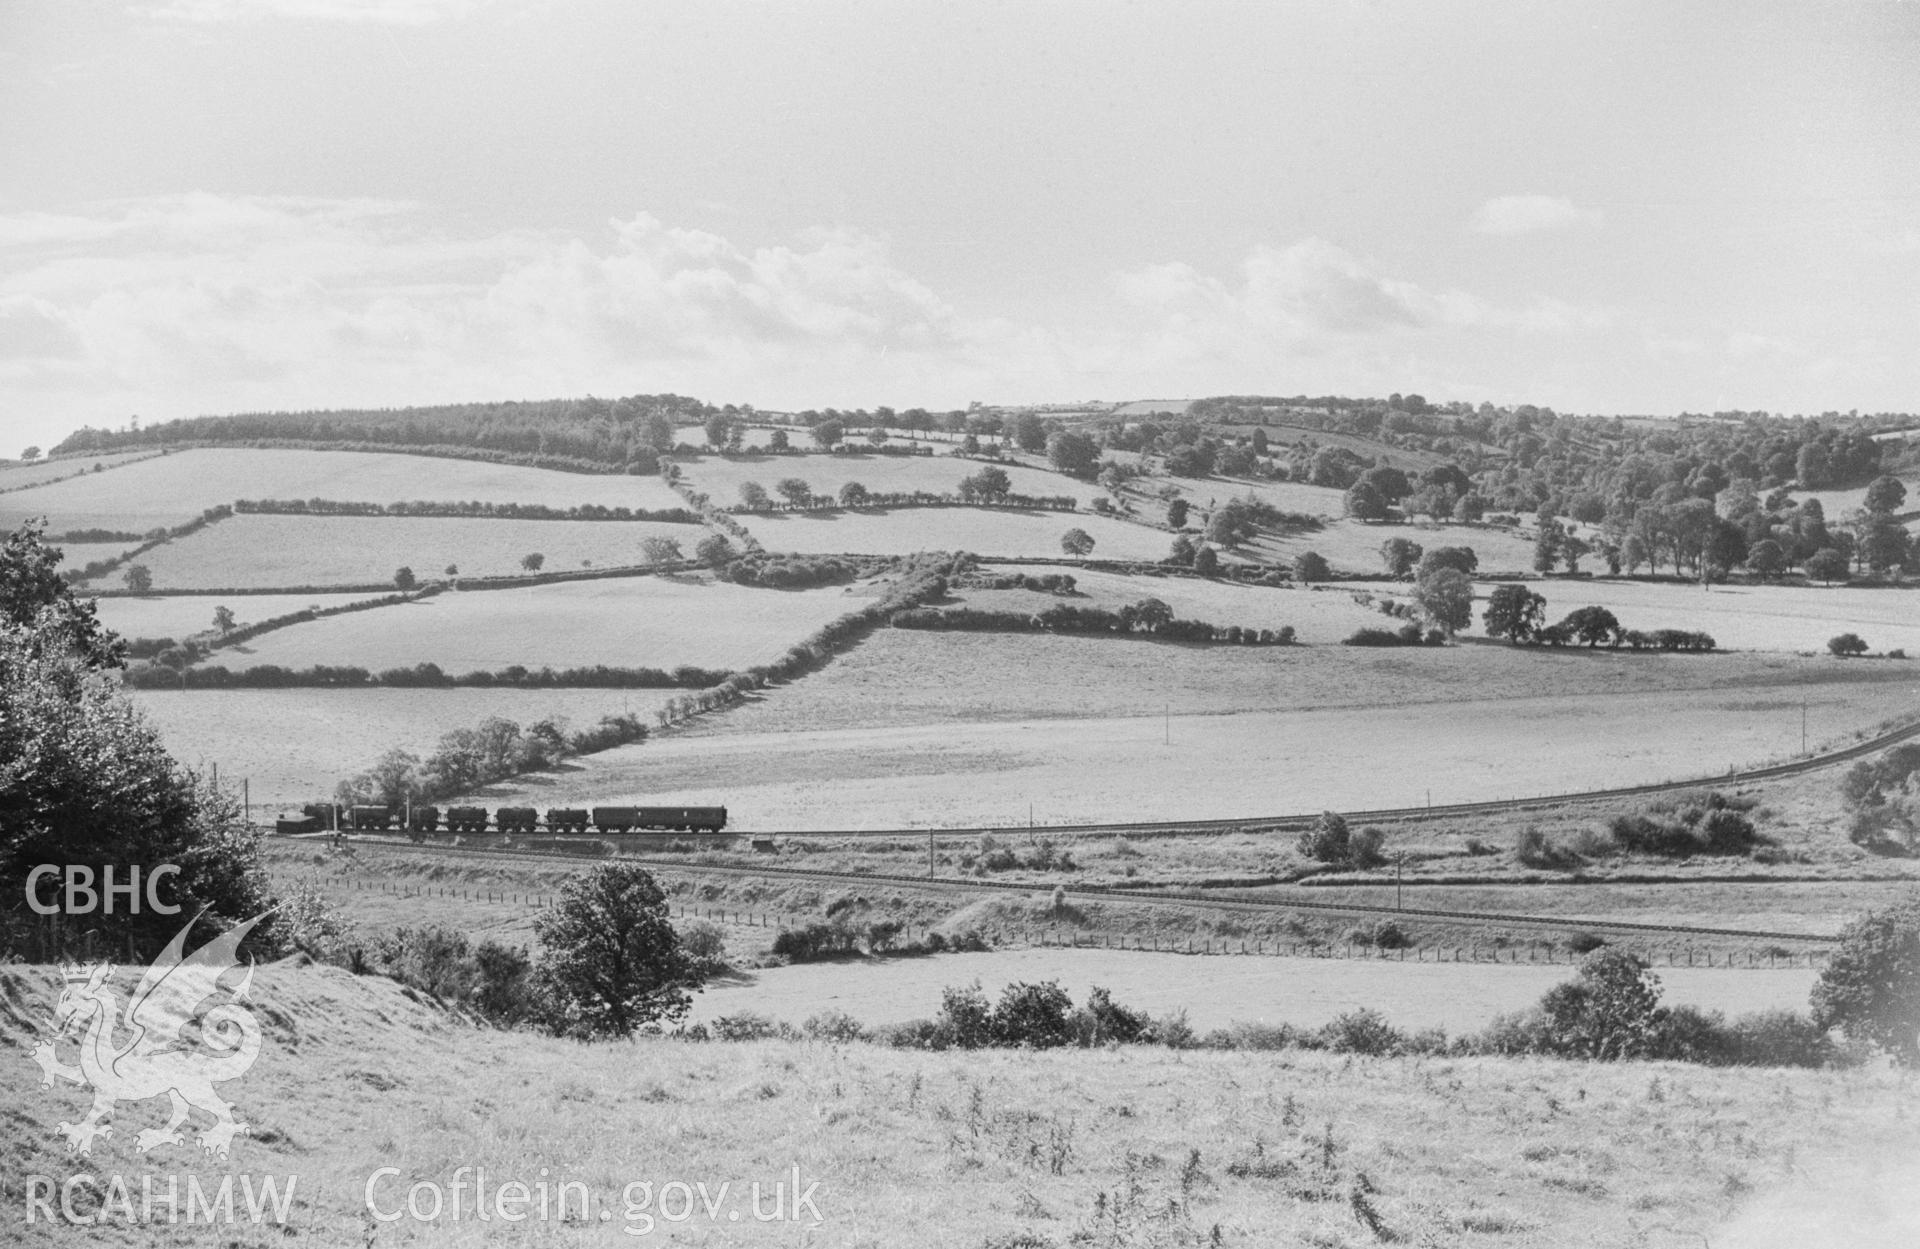 Black and white photograph showing Aberayron Junction looking west, with milk train coming off the Aberayron Branch and joining the main line towards Lampeter; produced by Arthur Chater in 1966, part of a larger collection which has not yet been fully catalogued.